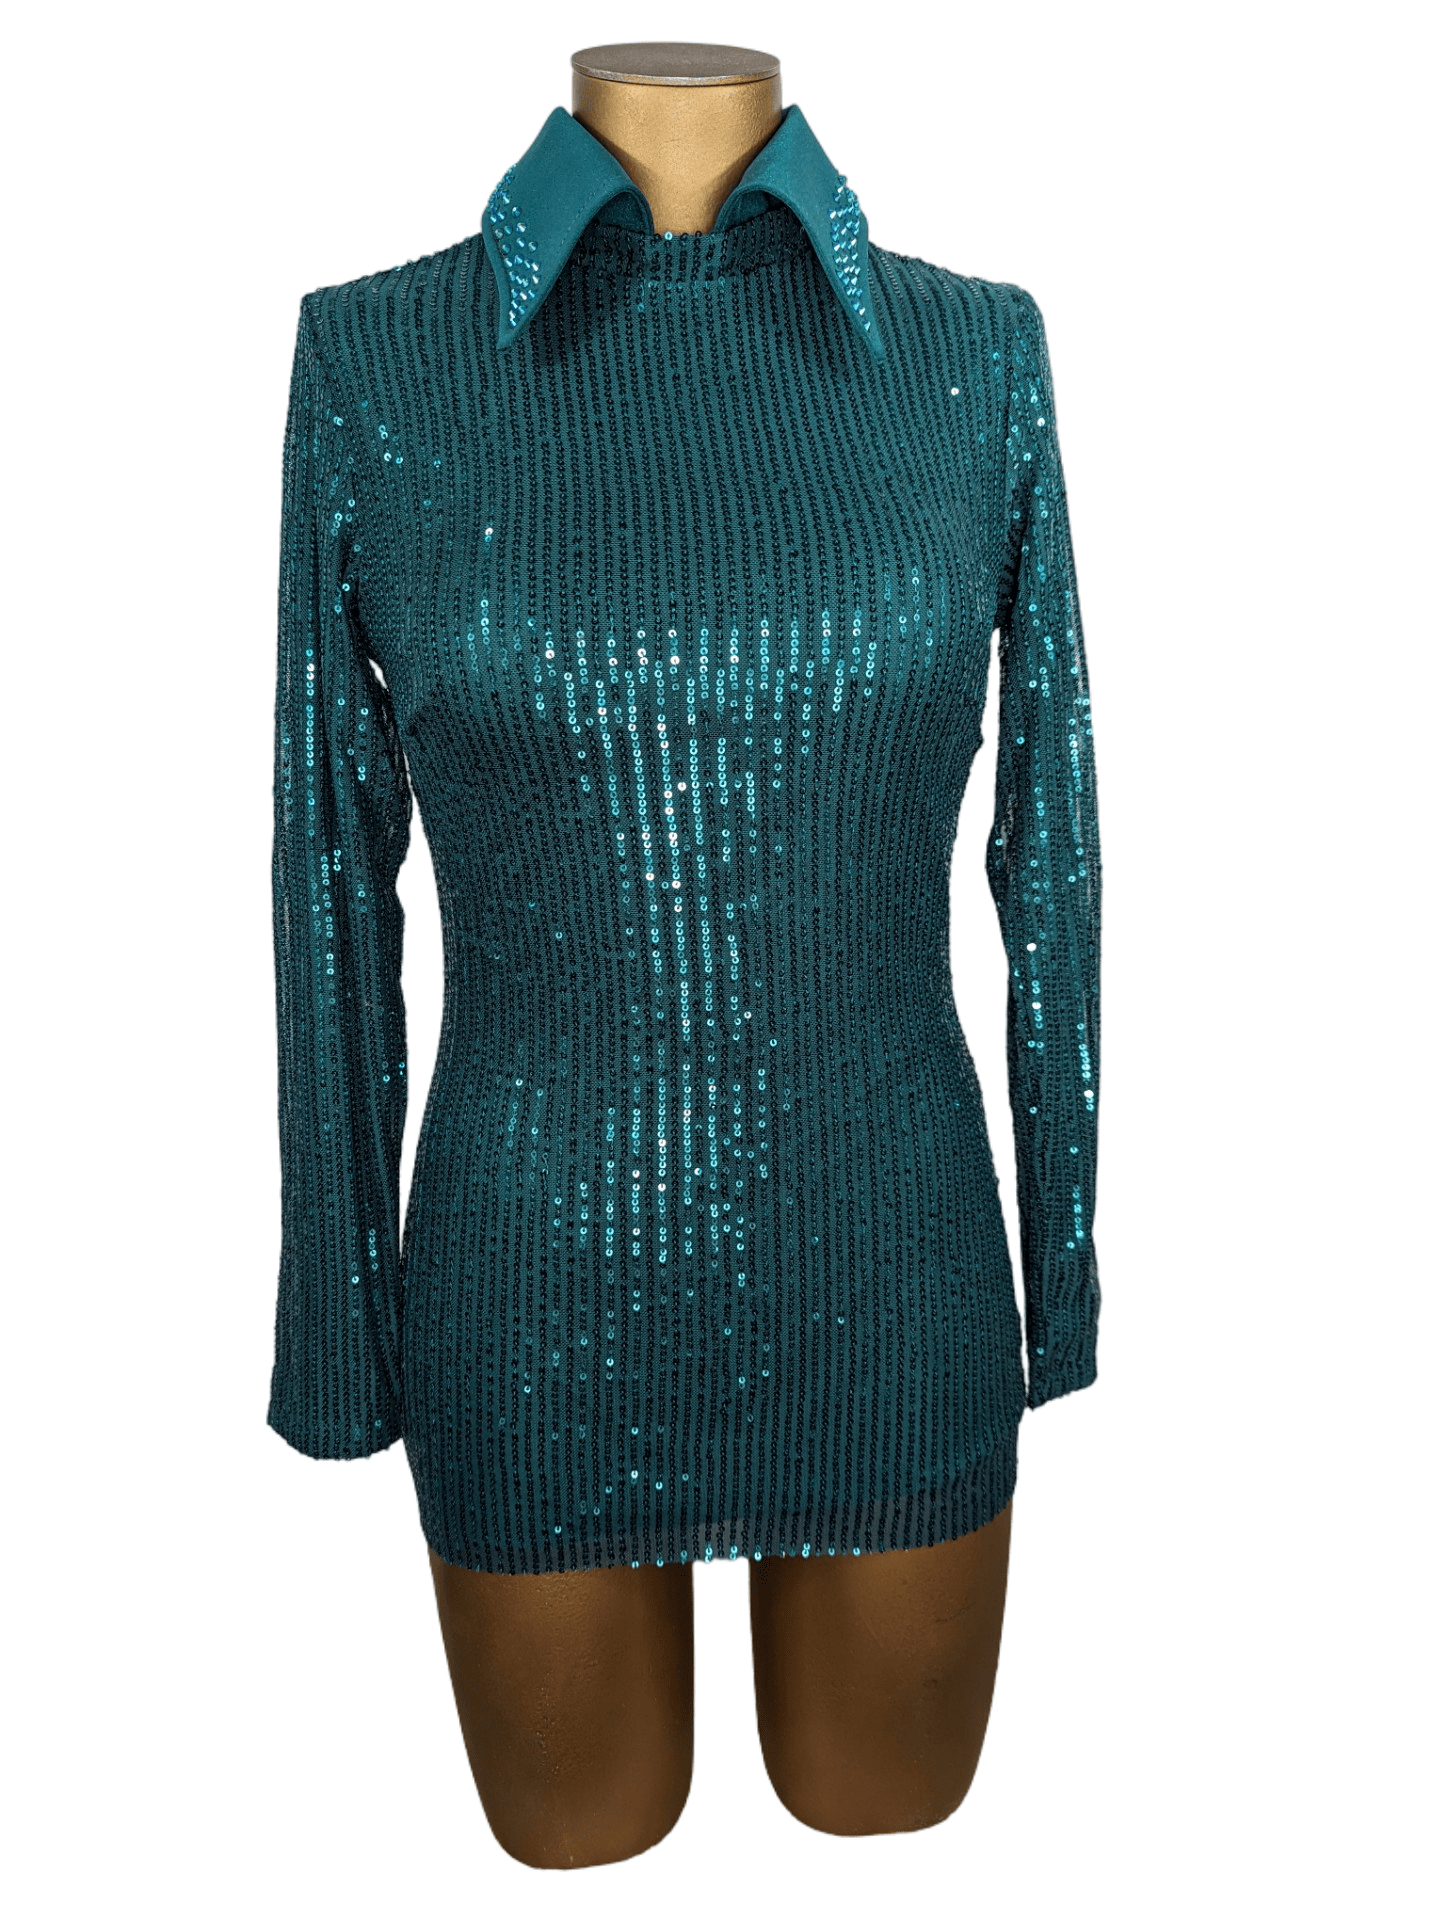 sparkle-ridge-womens-western-wear-affordable-show-clothes-horse-shirts-with-bling-rodeo-bodysuit-dark-green-sequin-showstopper-front.png (Copy) (Copy)